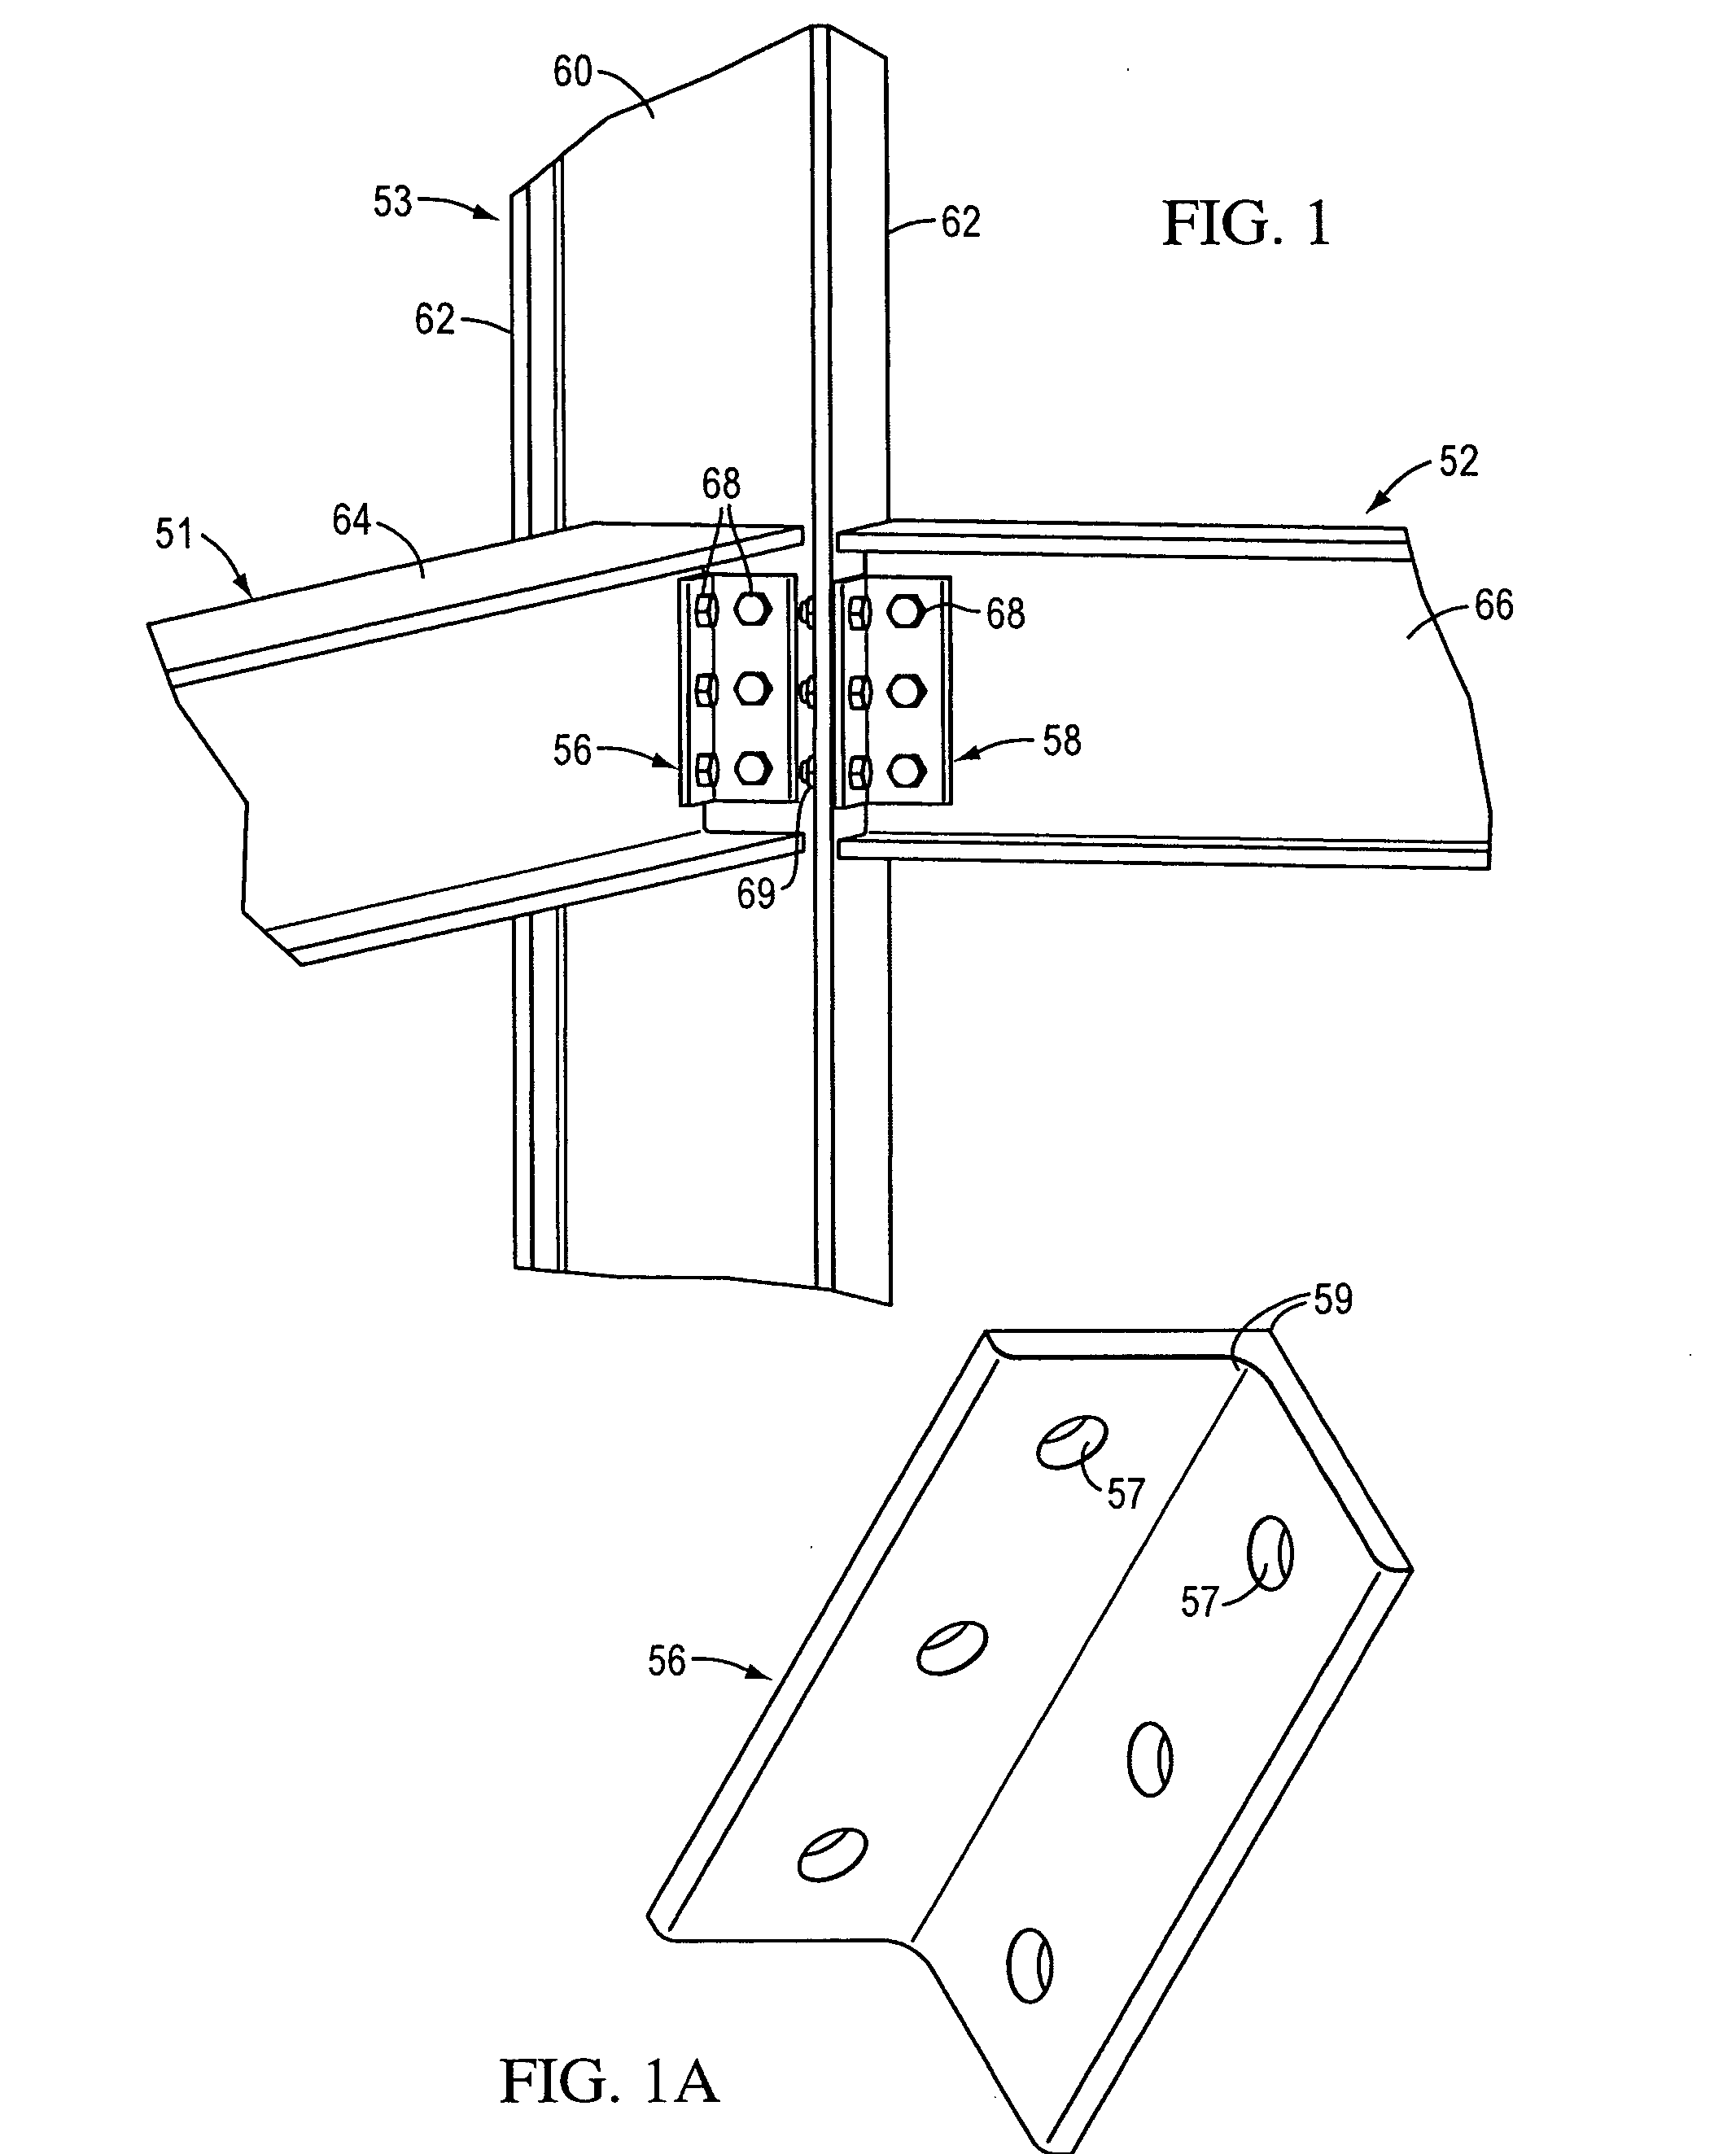 Punch and drill machine for a structural angle